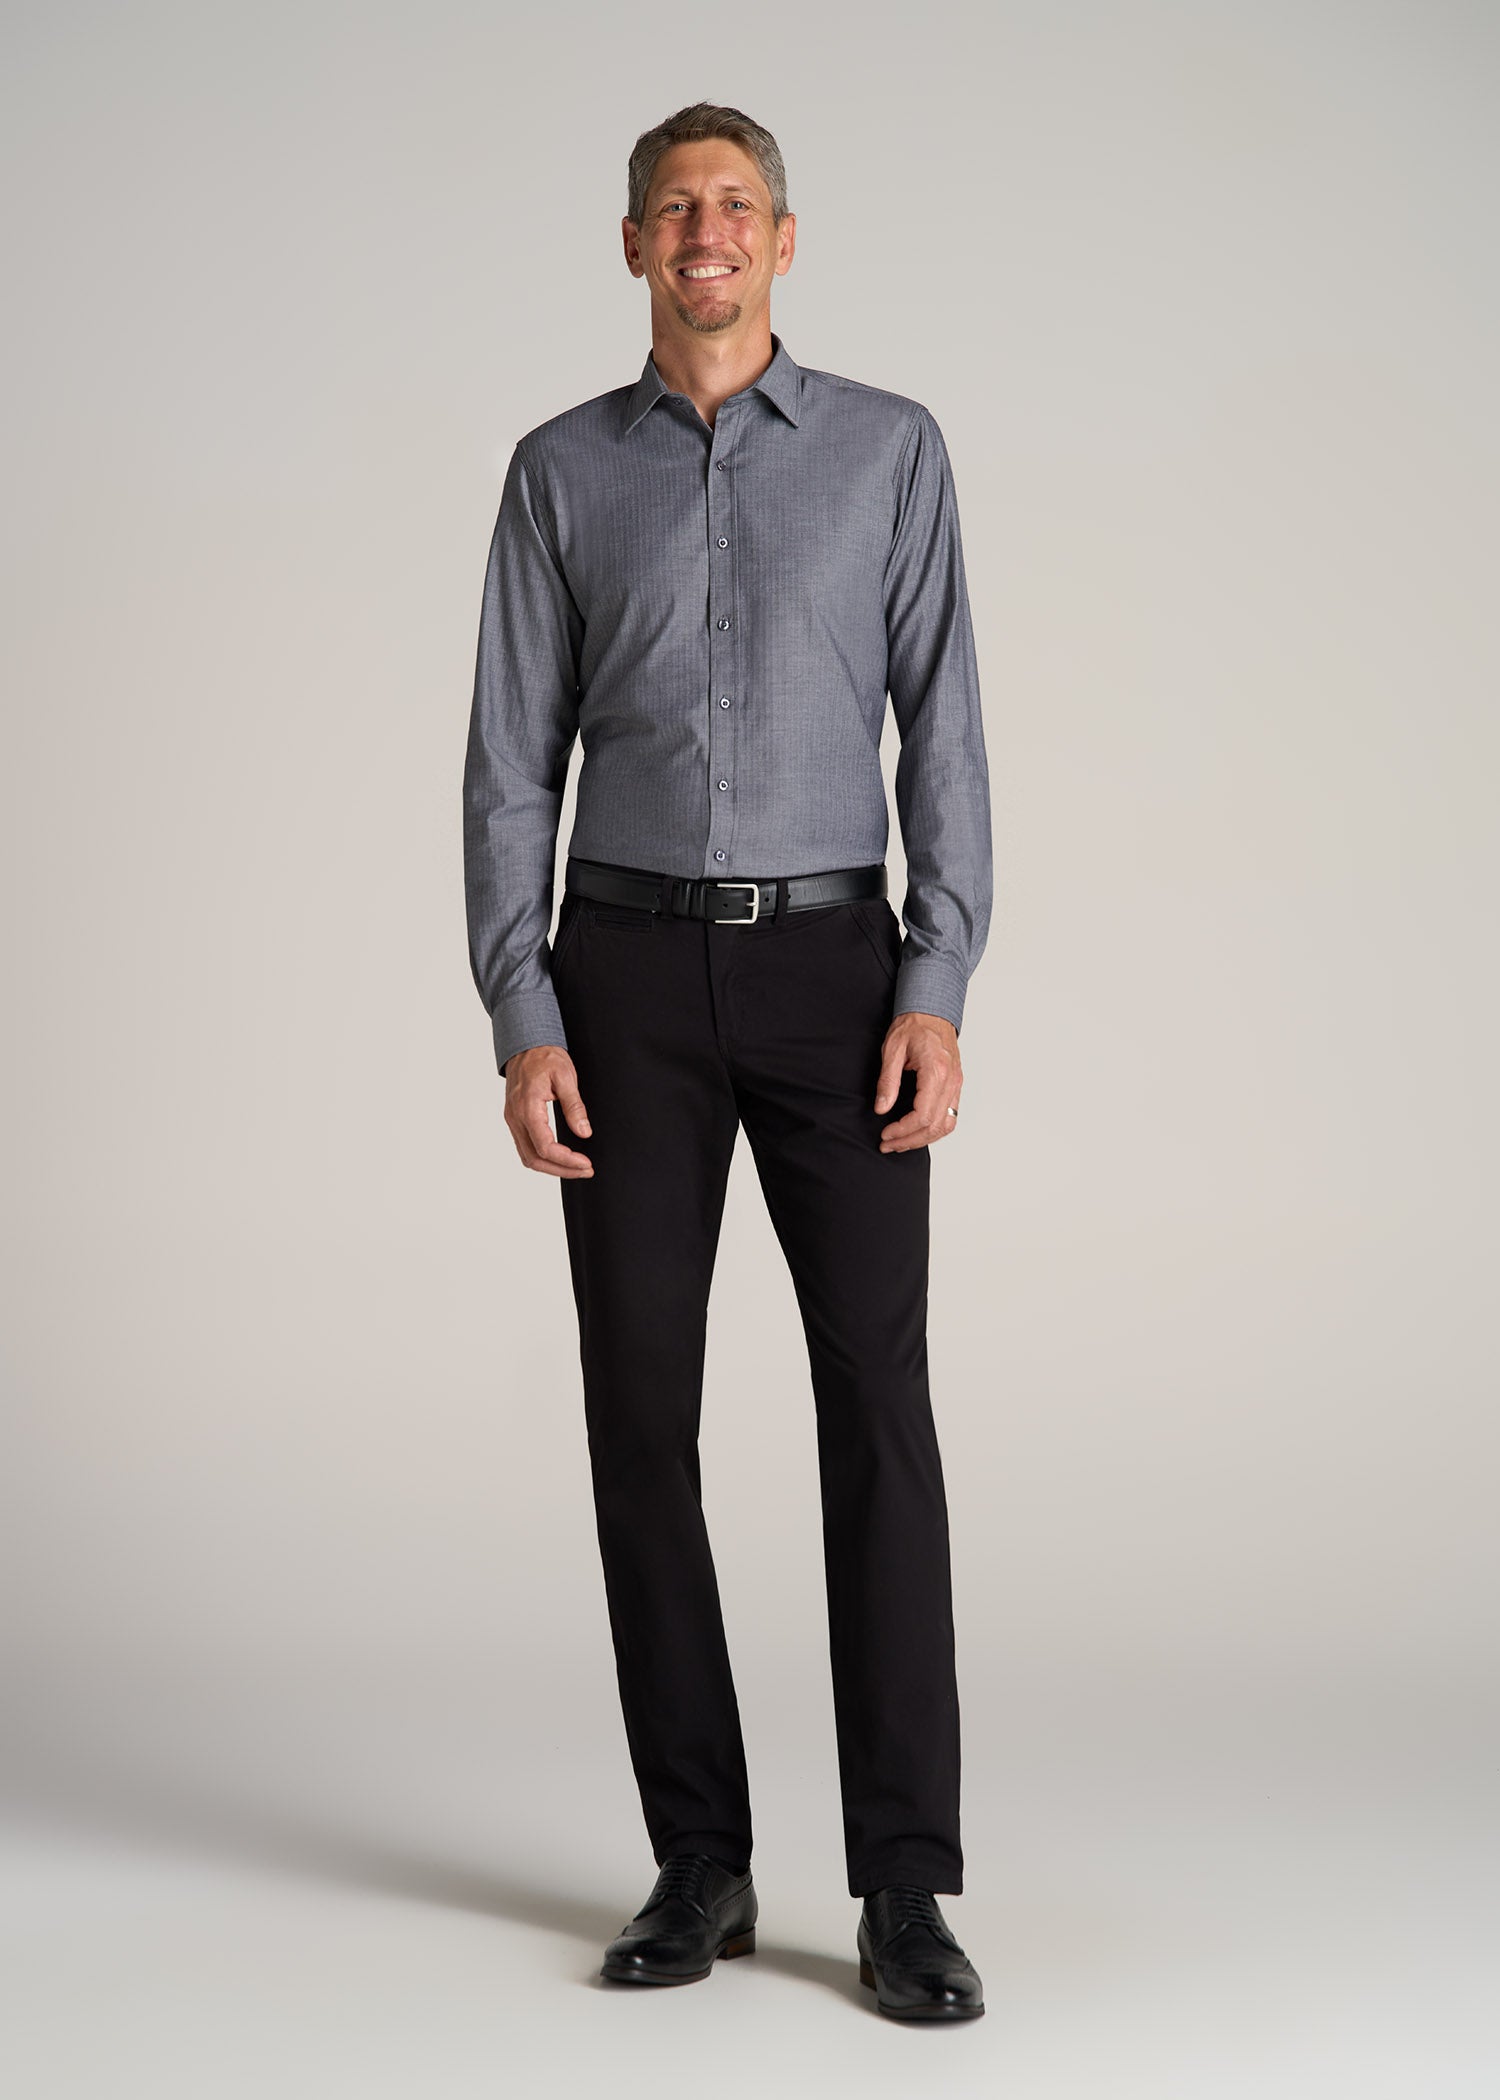 $38 Complete Outfit with Dress Pant / Black Dress Shirt | Formal Fashions